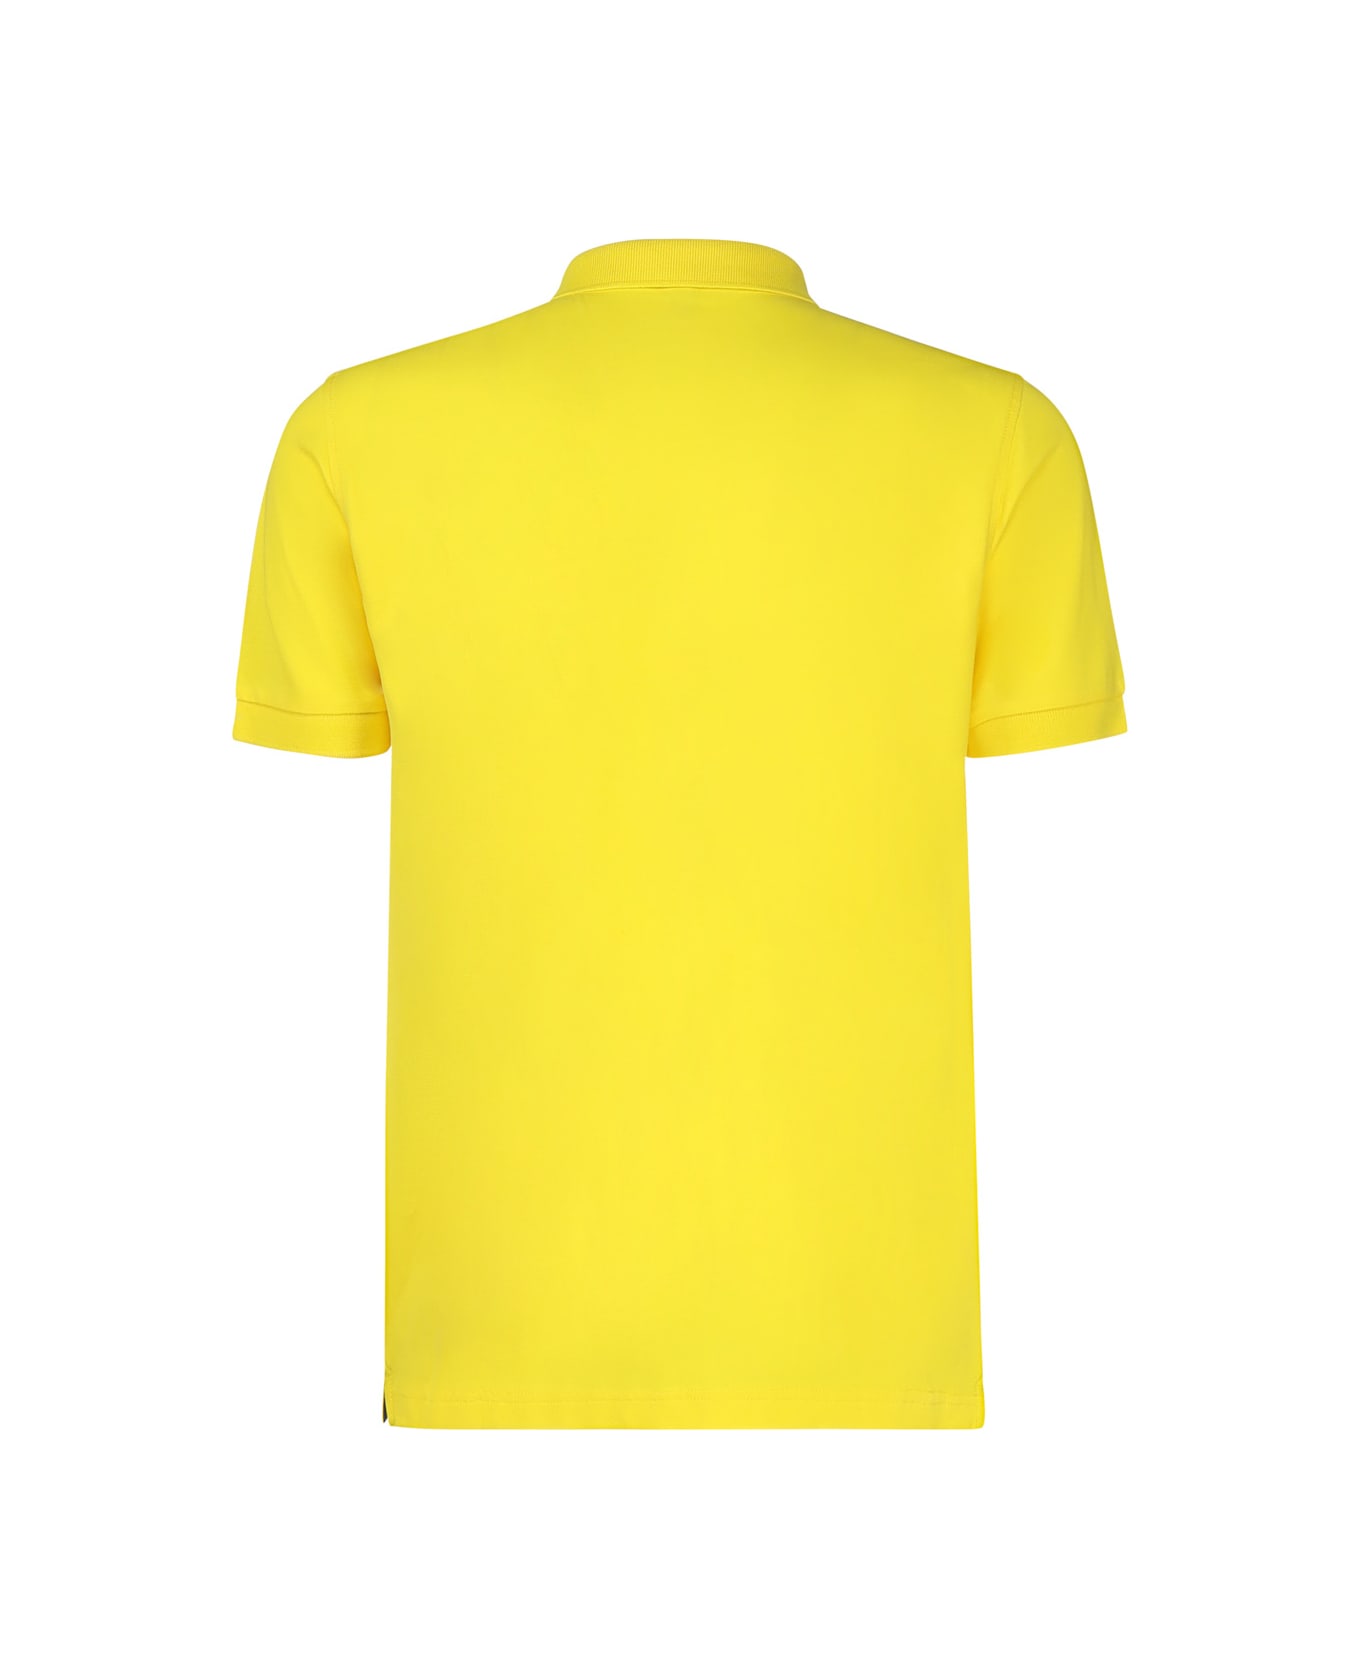 Sun 68 Polo Solid - Yellow ポロシャツ